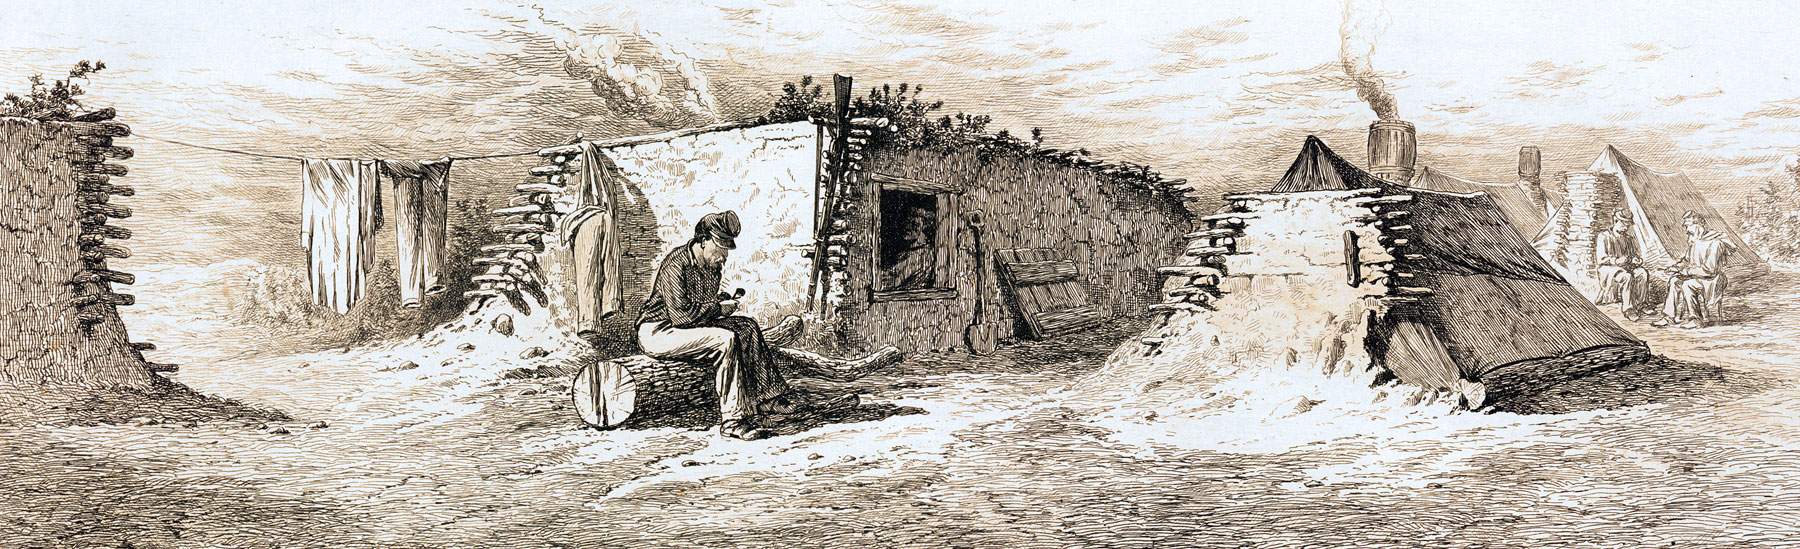 "Winter Camp - Mud Huts," Edwin Forbes, copper plate etching, 1876, zoomable image